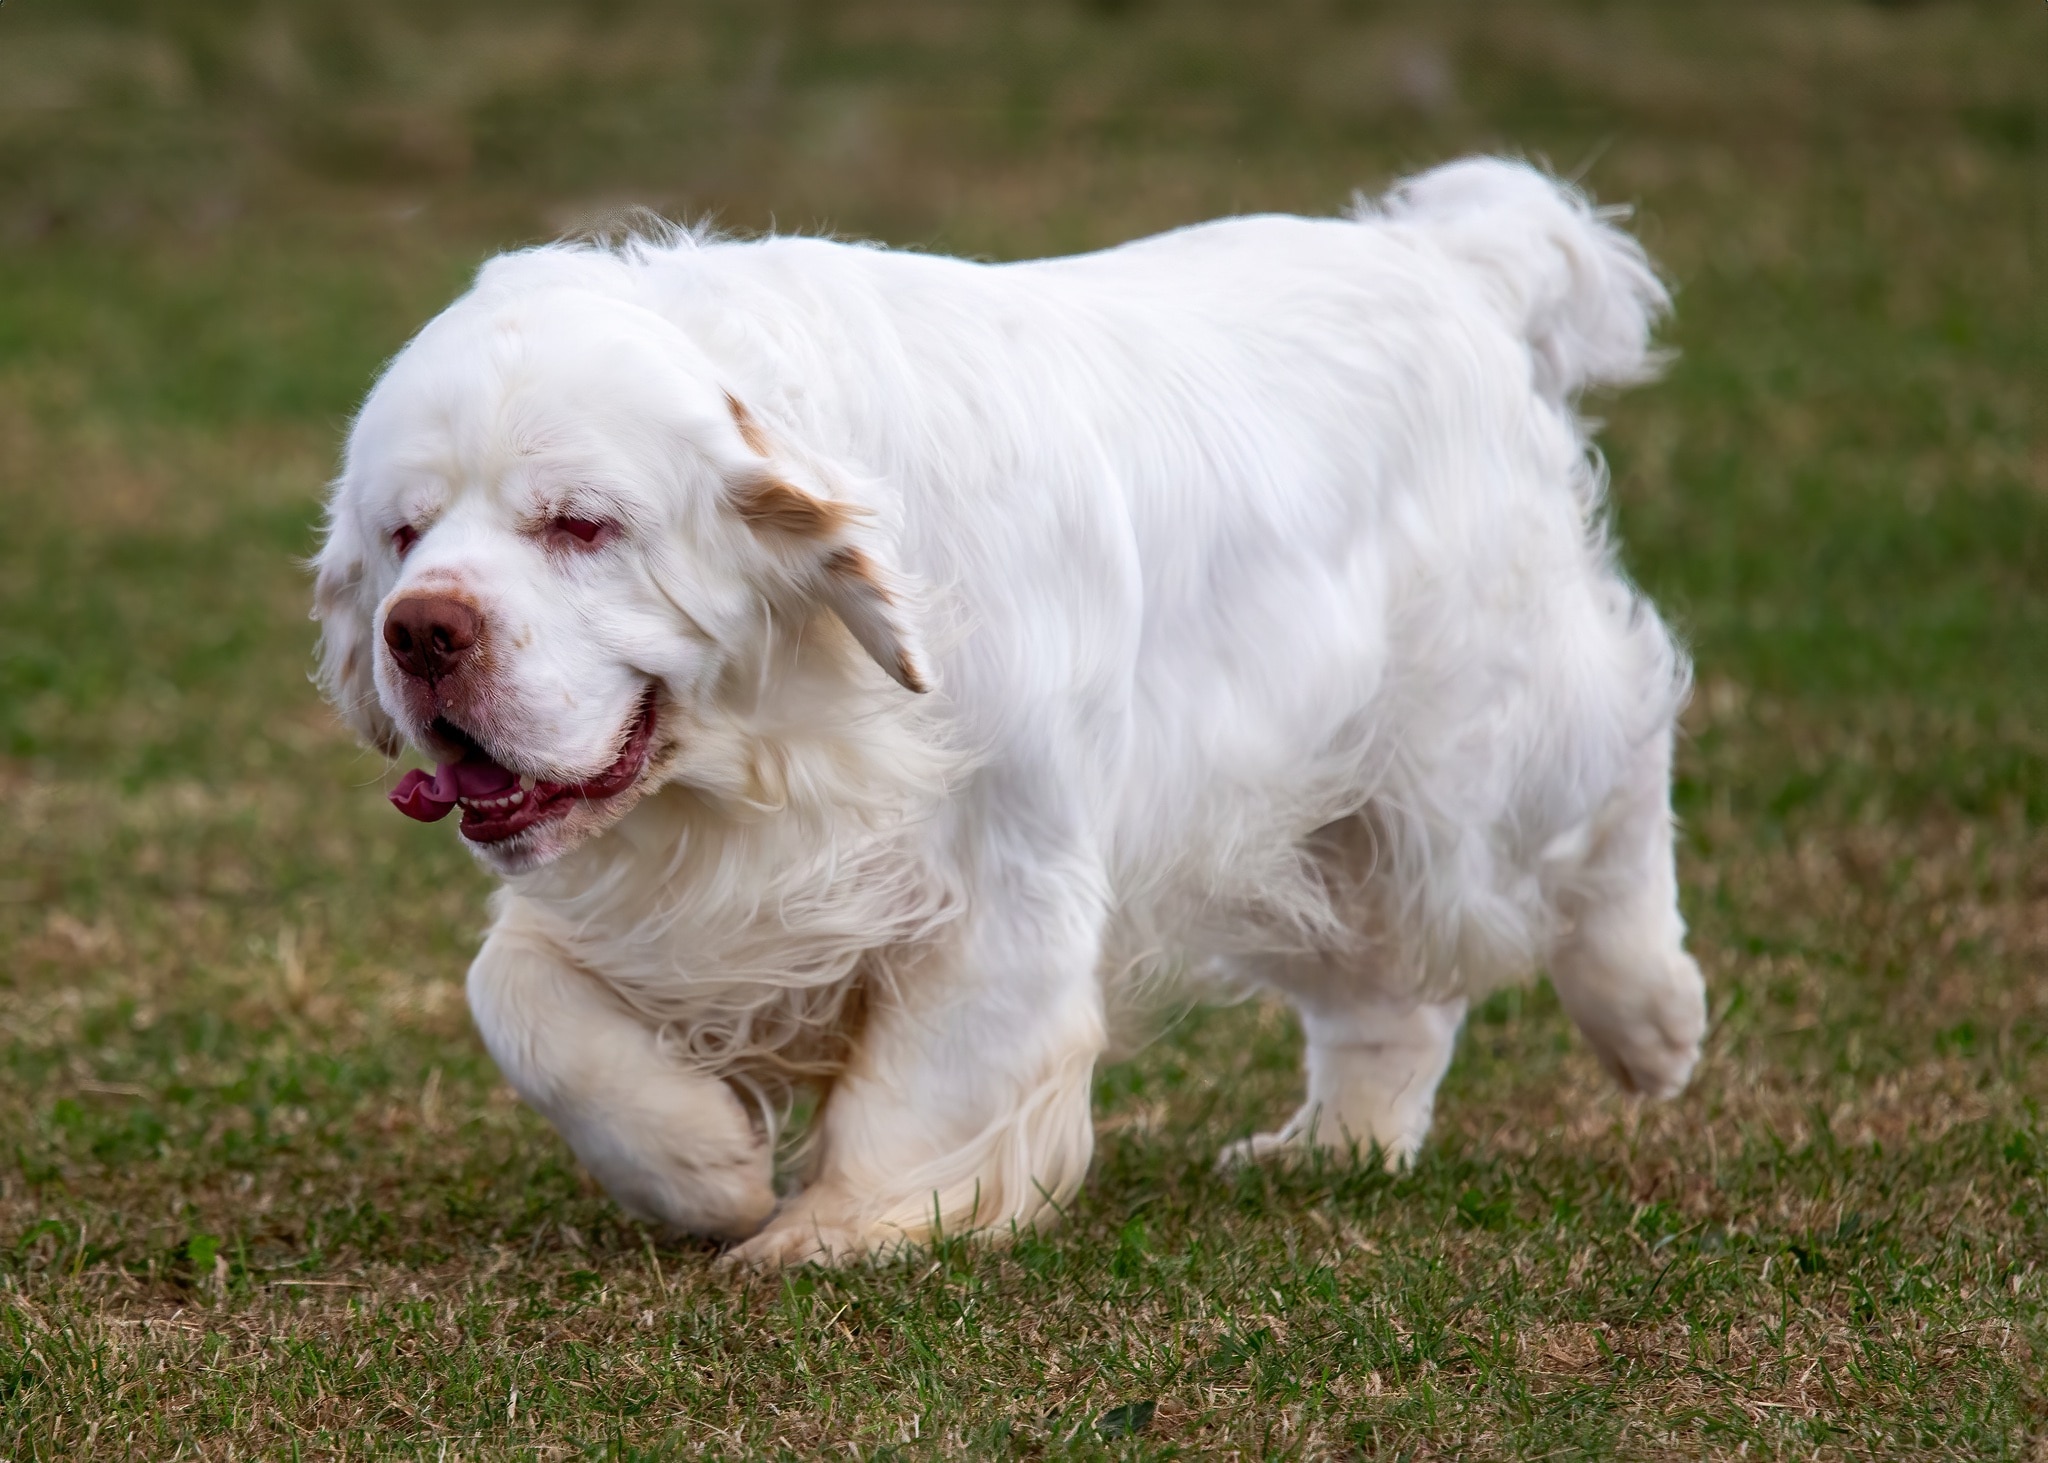 clumber spaniel trotting through grass with his tongue hanging out